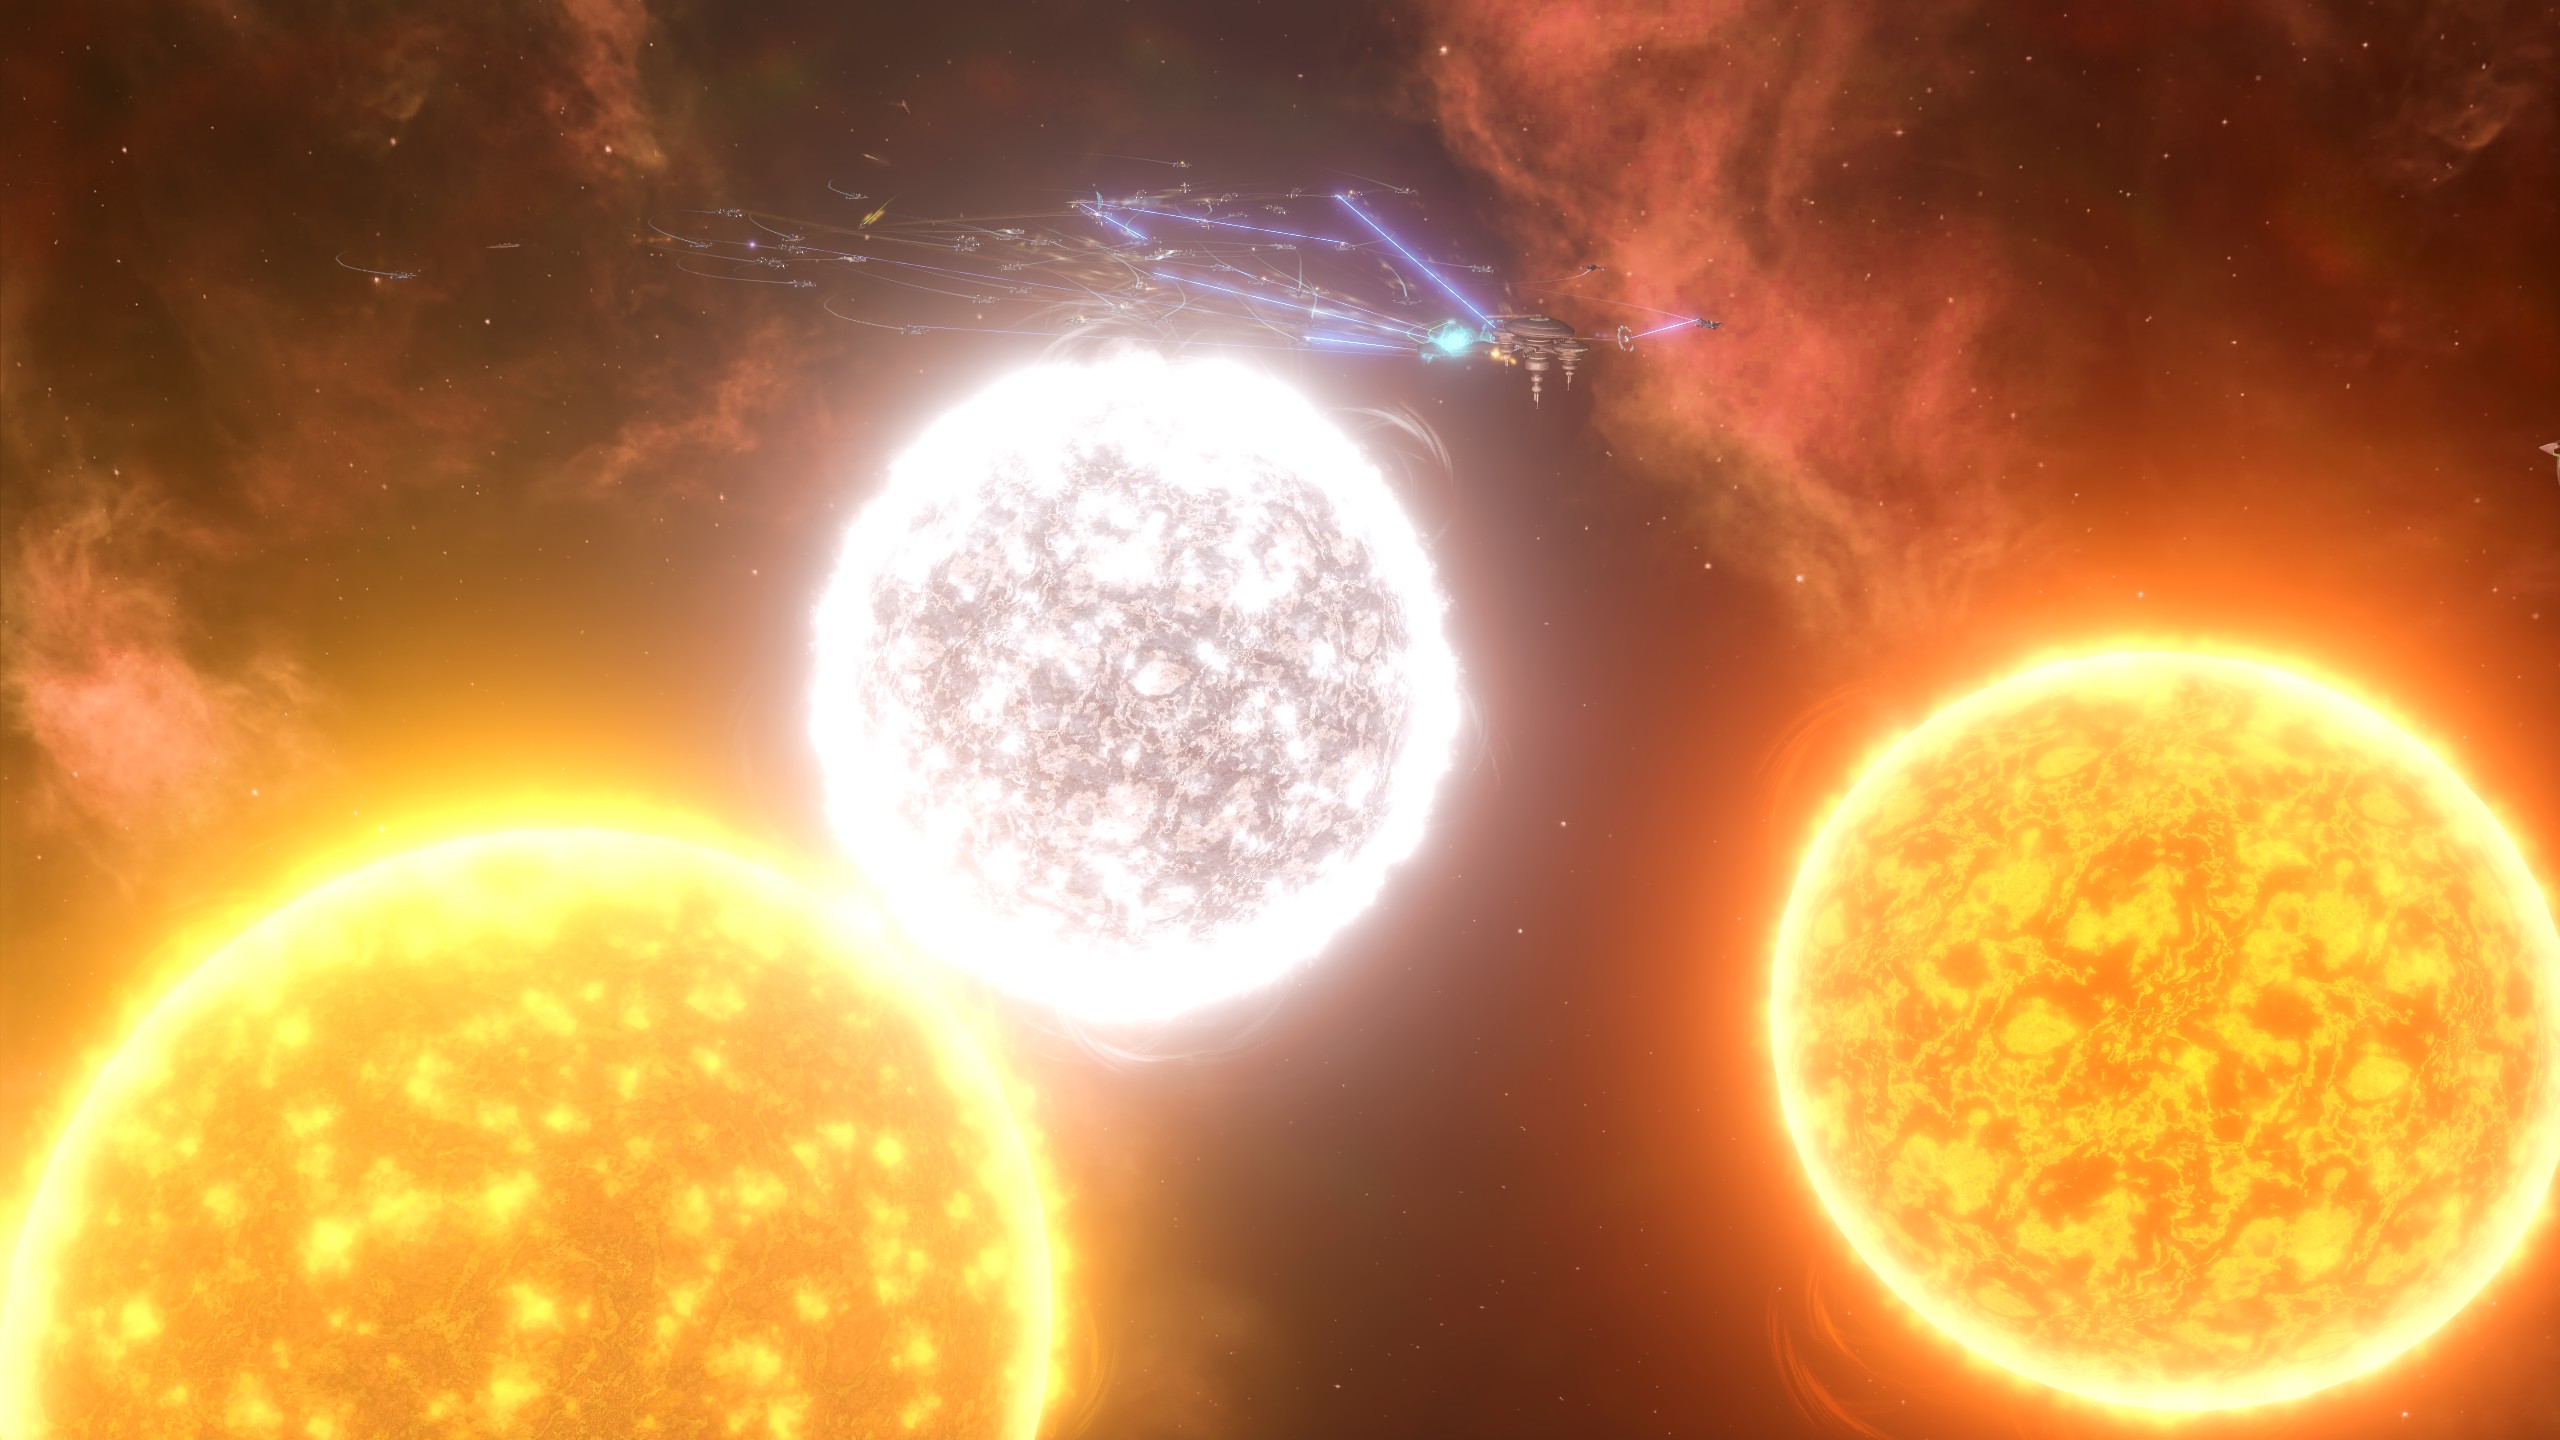 A space battle over three suns